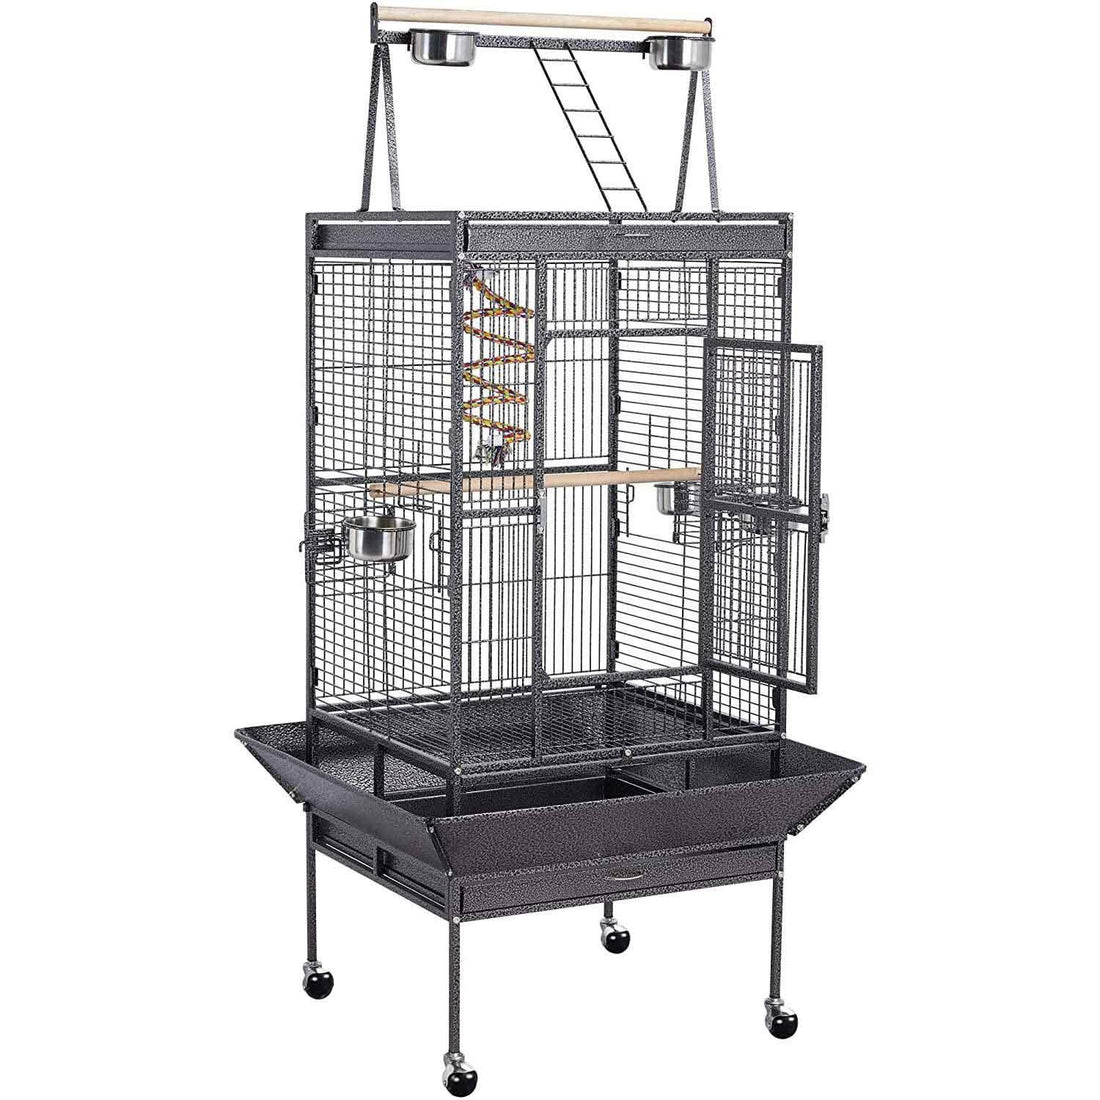 Large Bird Cage 174cm with Play top - Pets Gear